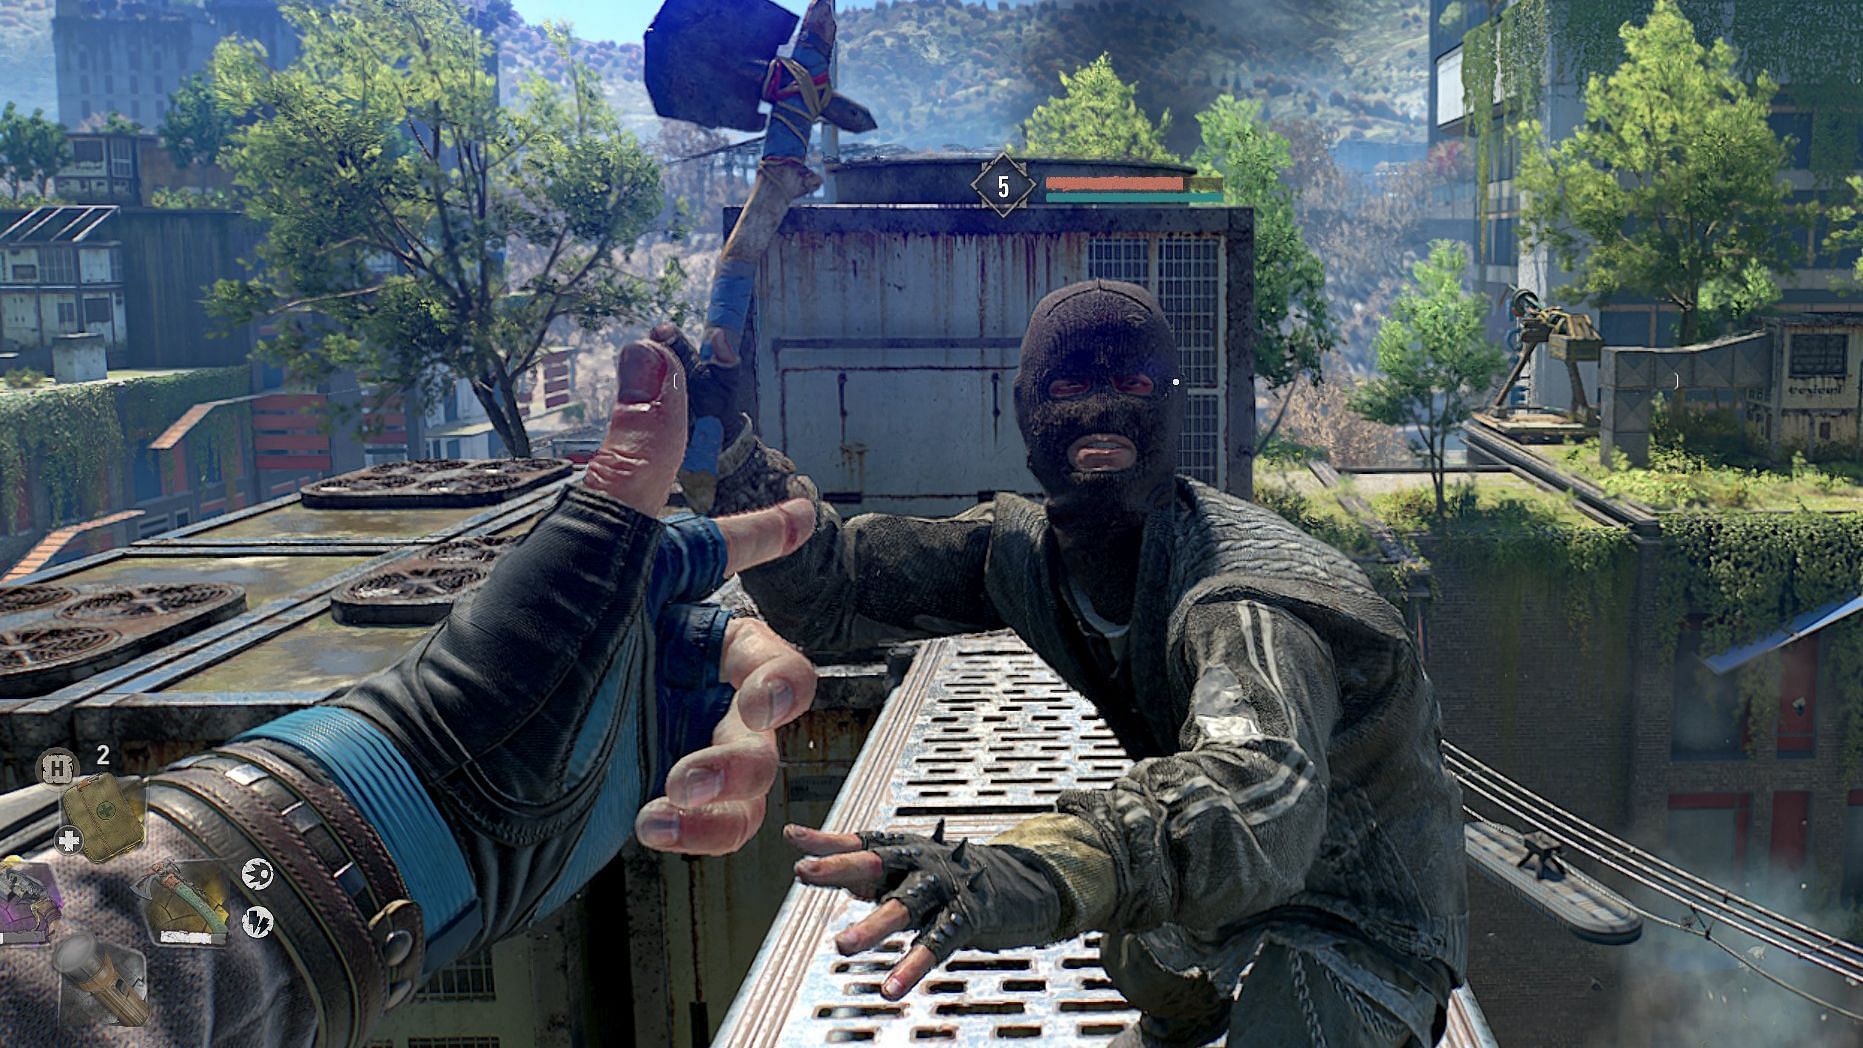 Using the Left Finger of gloVa in Dying Light 2 is hysterical (Image via Techland)